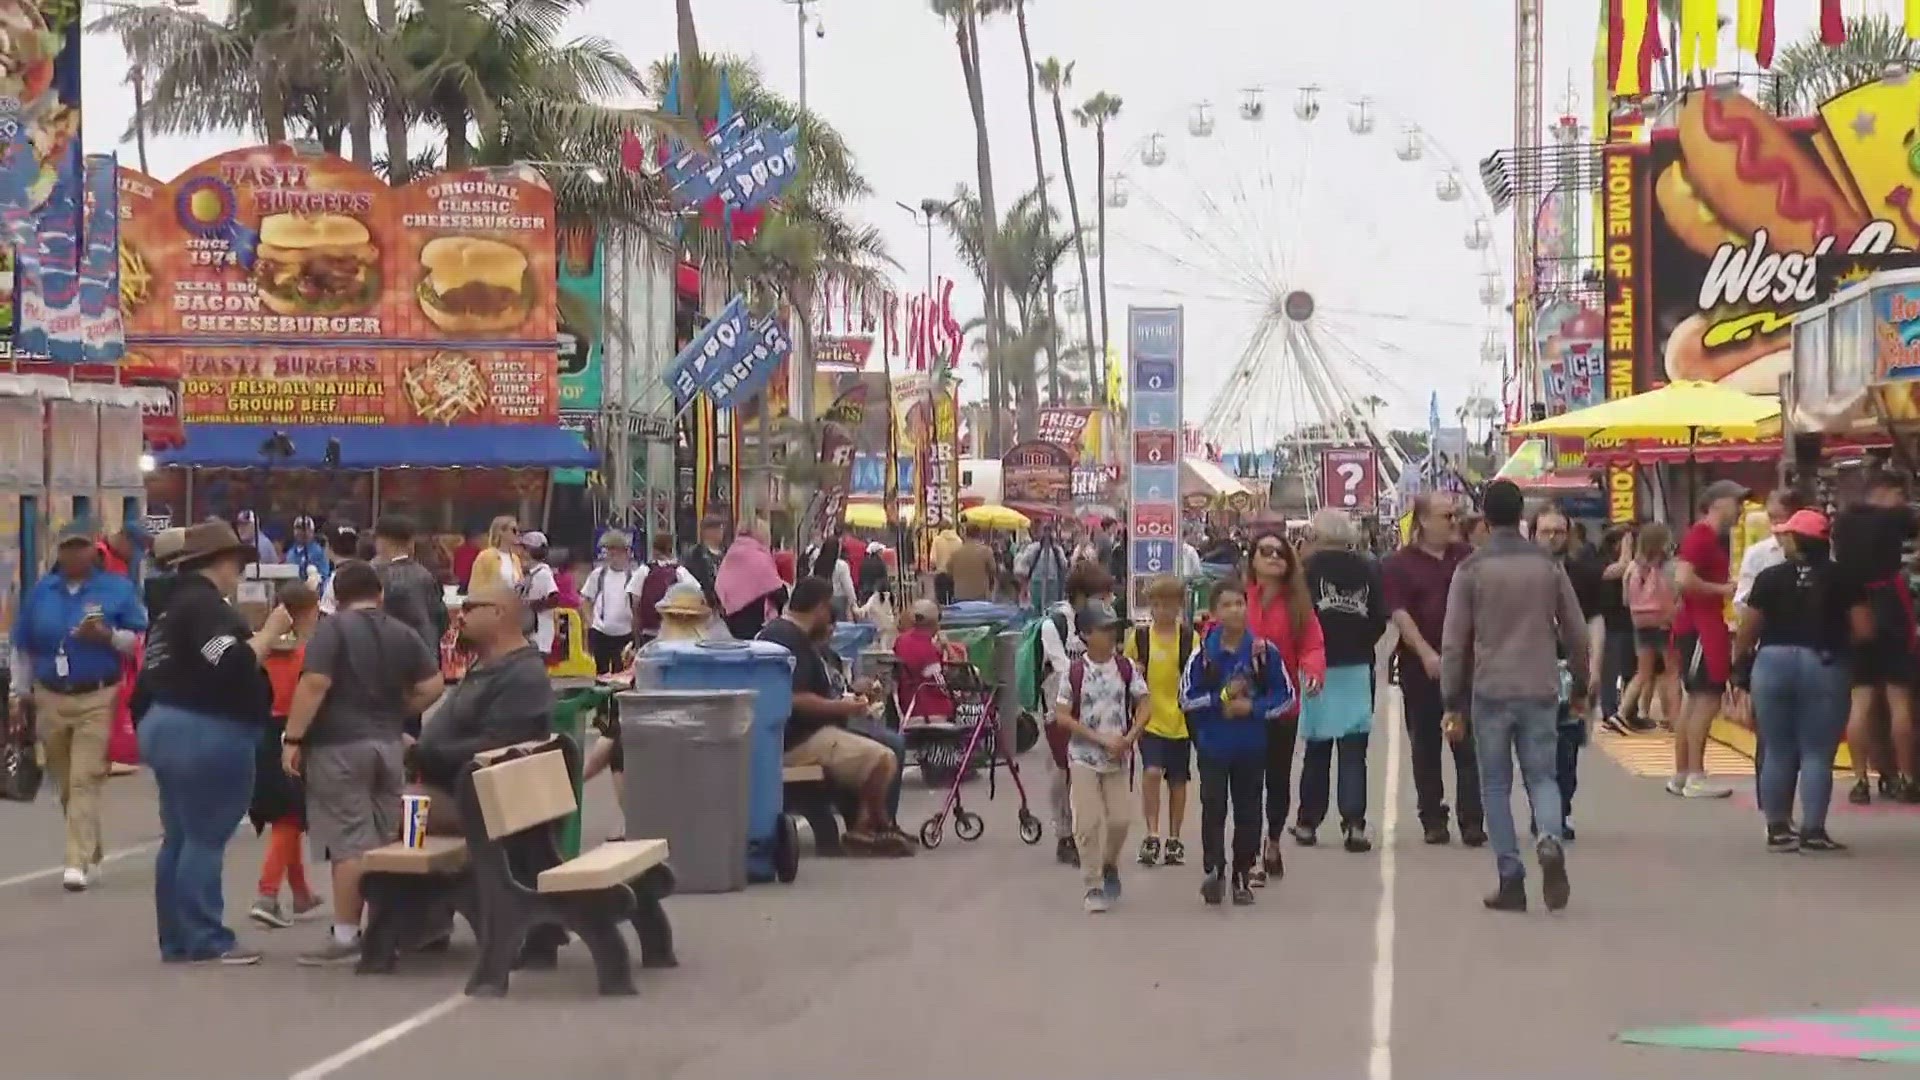 The San Diego County Fair kicks off today with food, fun, music, and more.